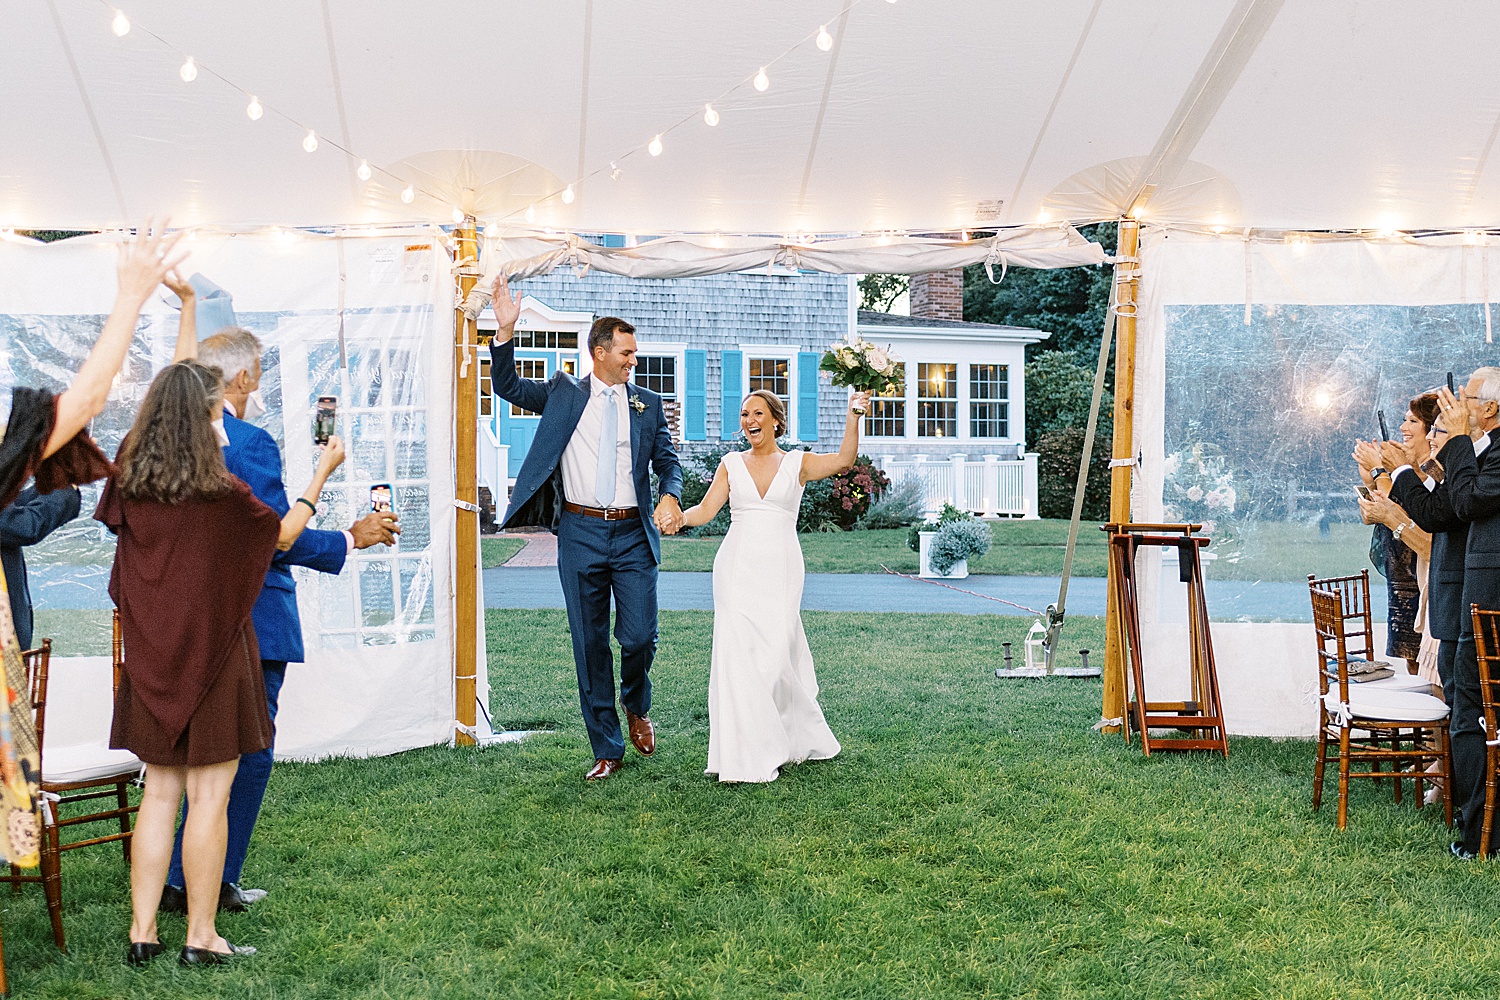 Newlyweds enter their reception under a tent on a lawn